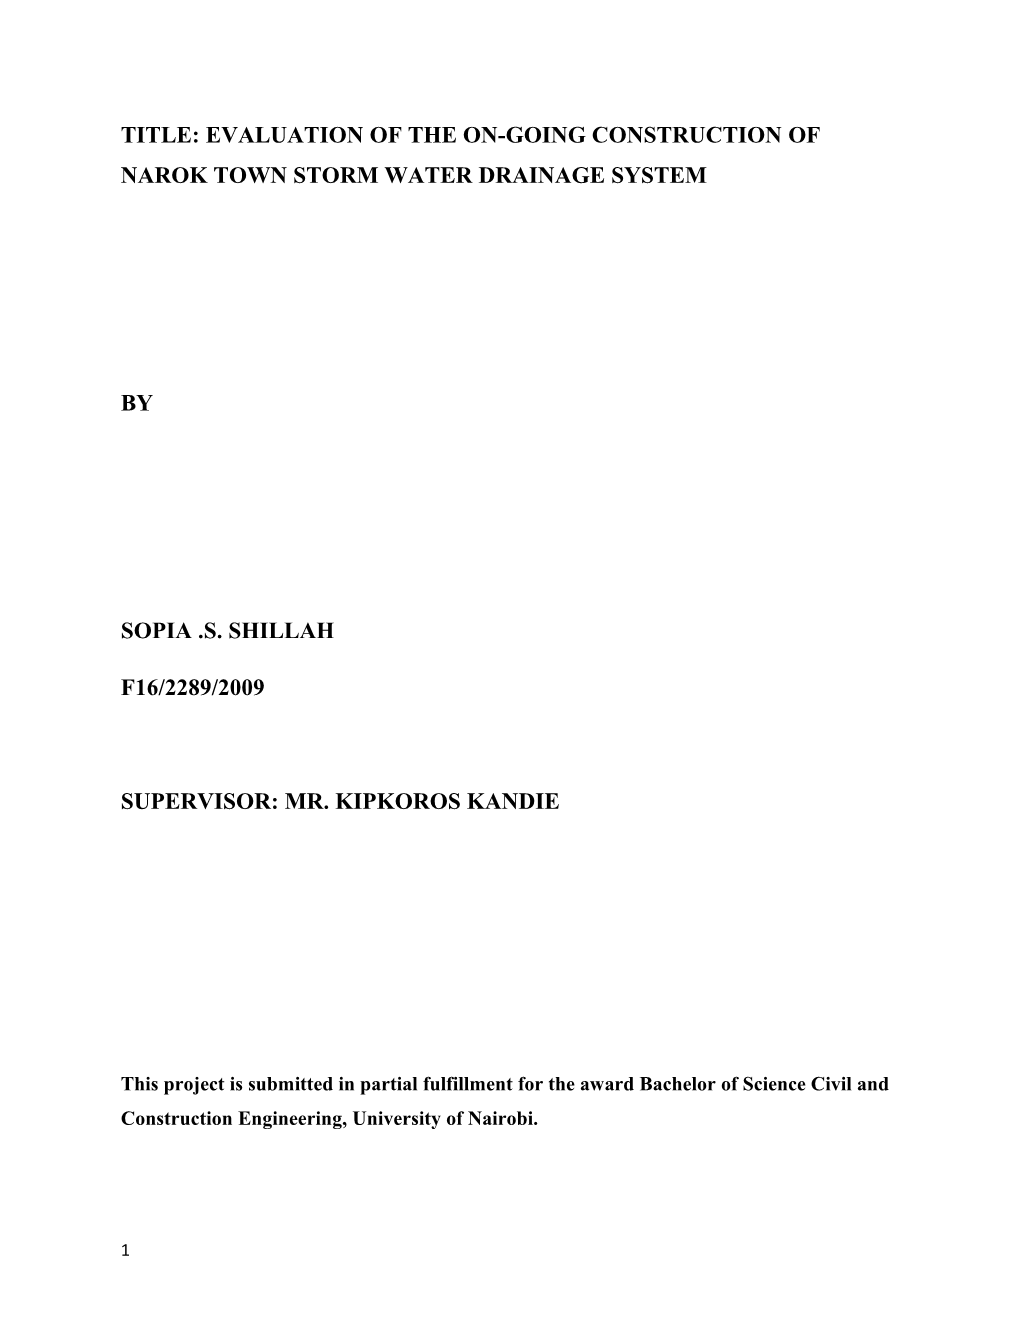 Title: Evaluation of the On-Going Construction of Narok Town Storm Water Drainage System